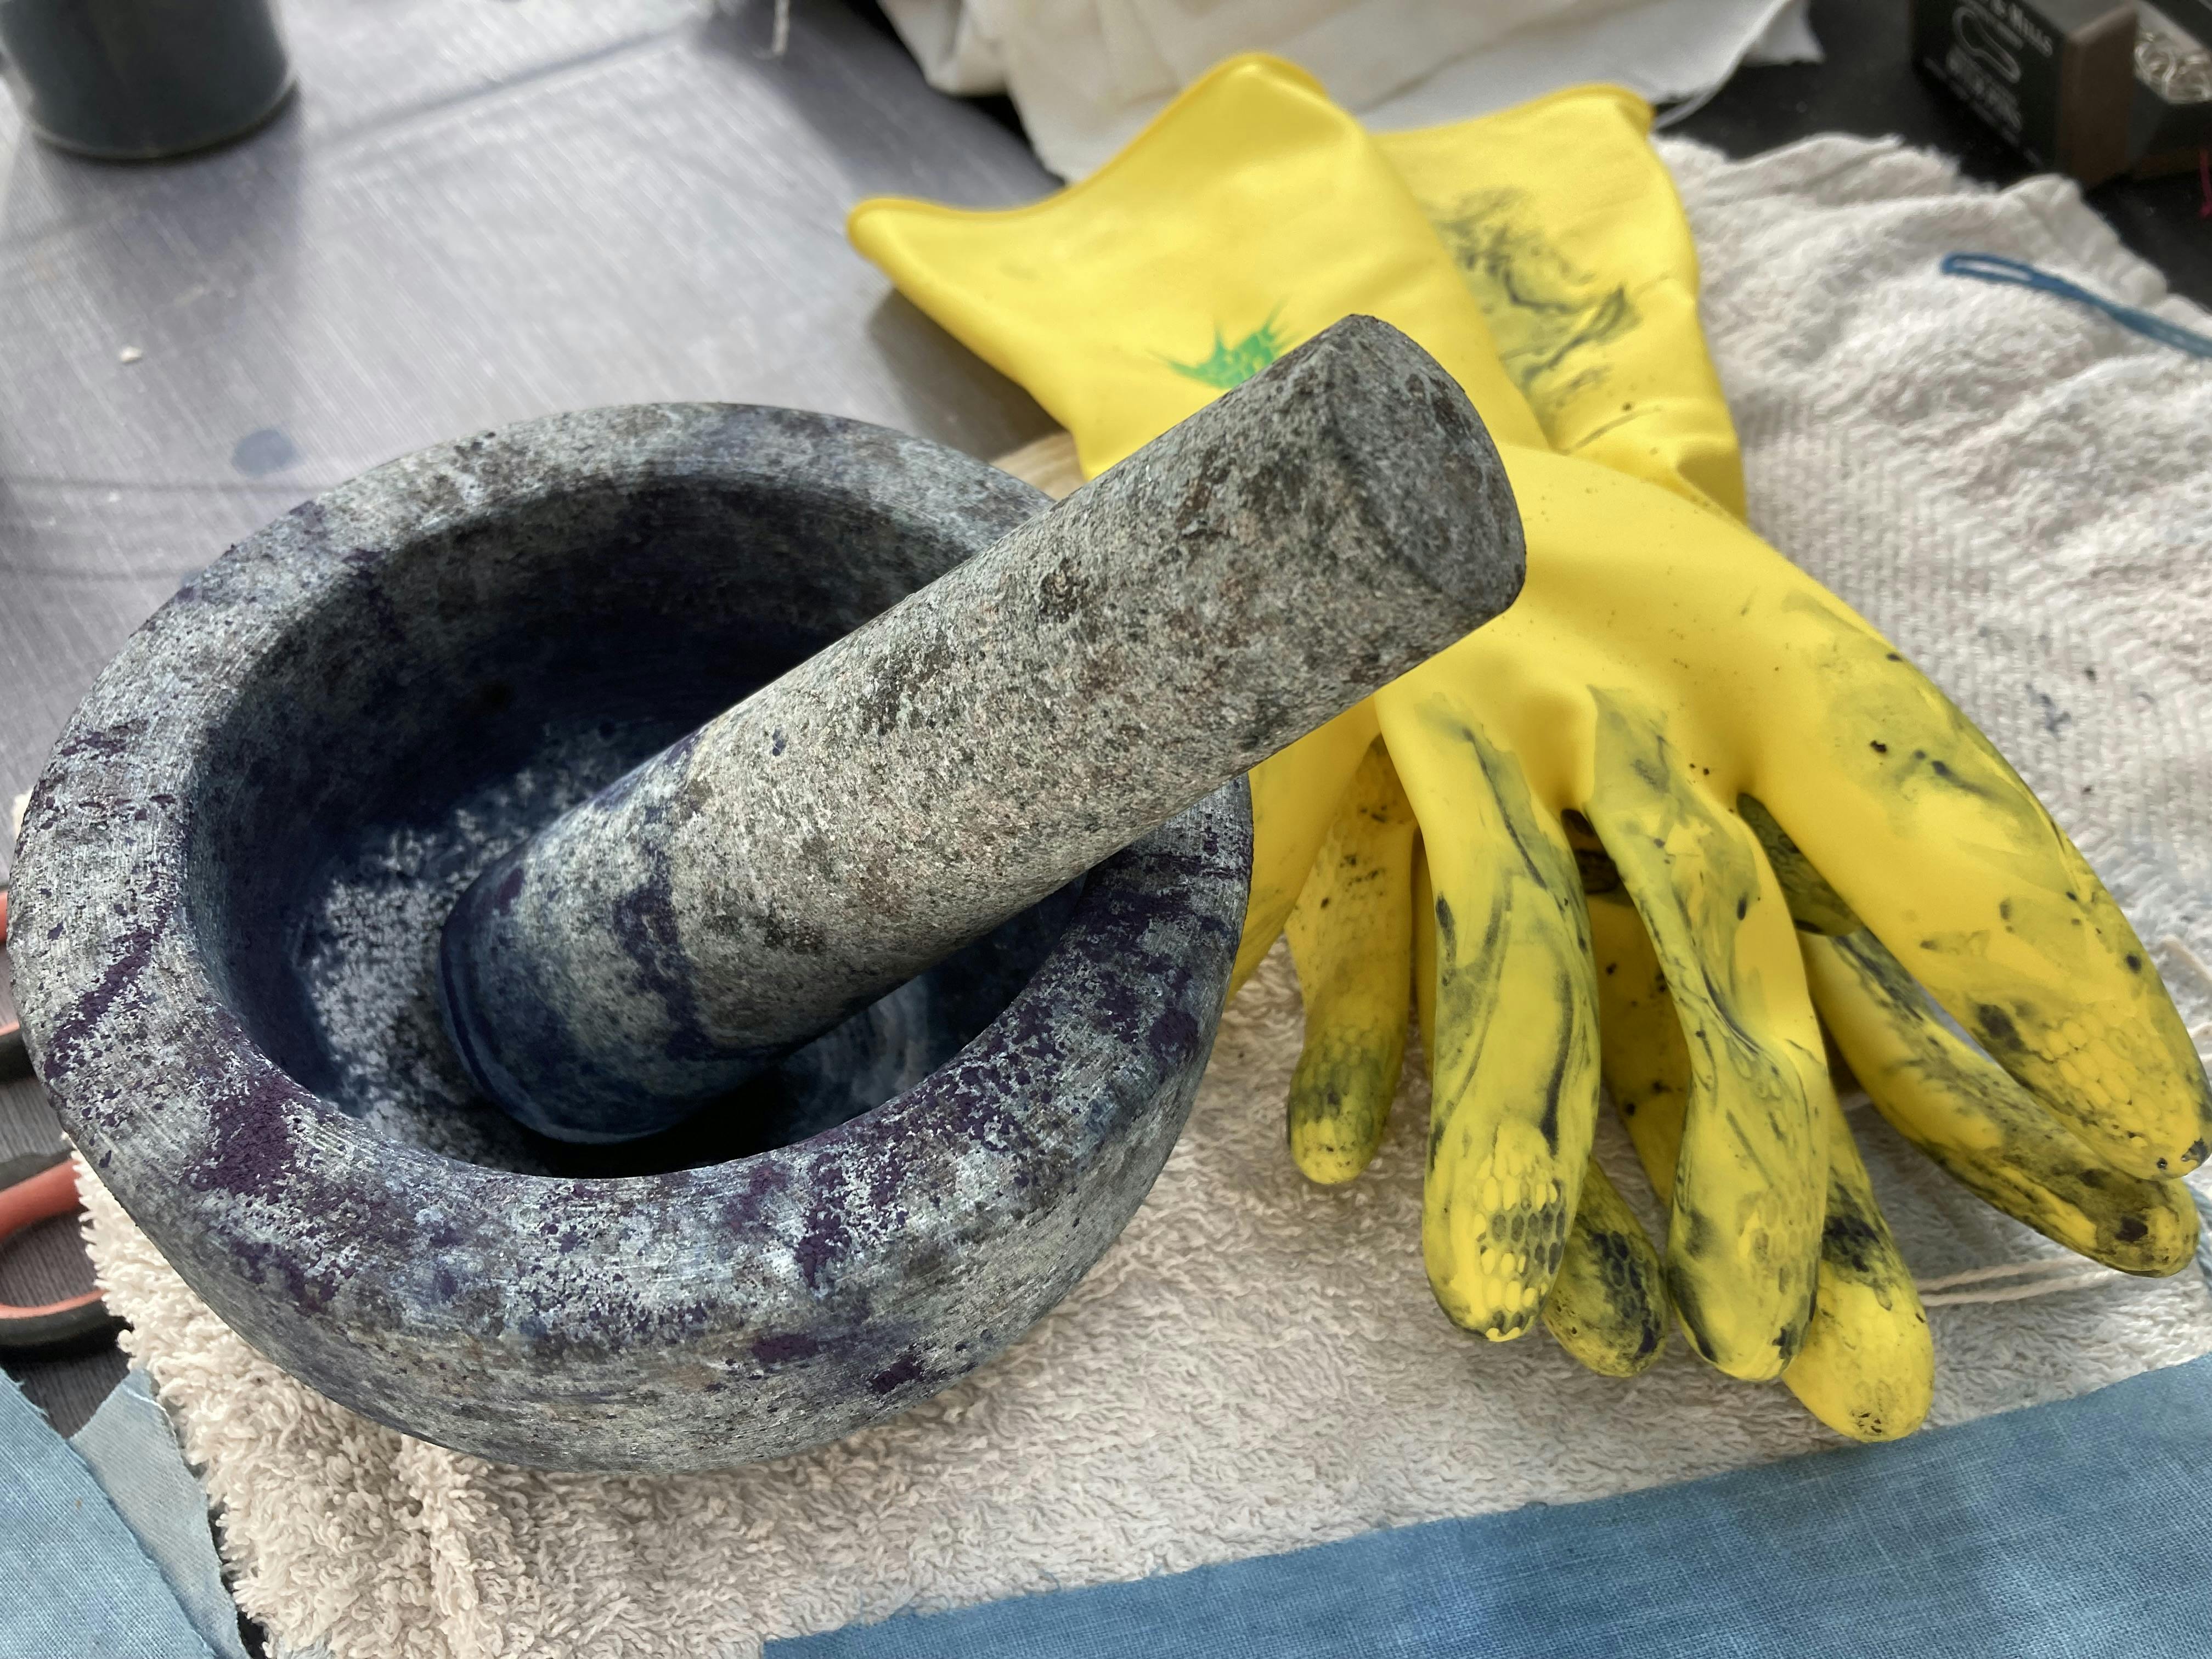 Pestle and mortar with rubber gloves